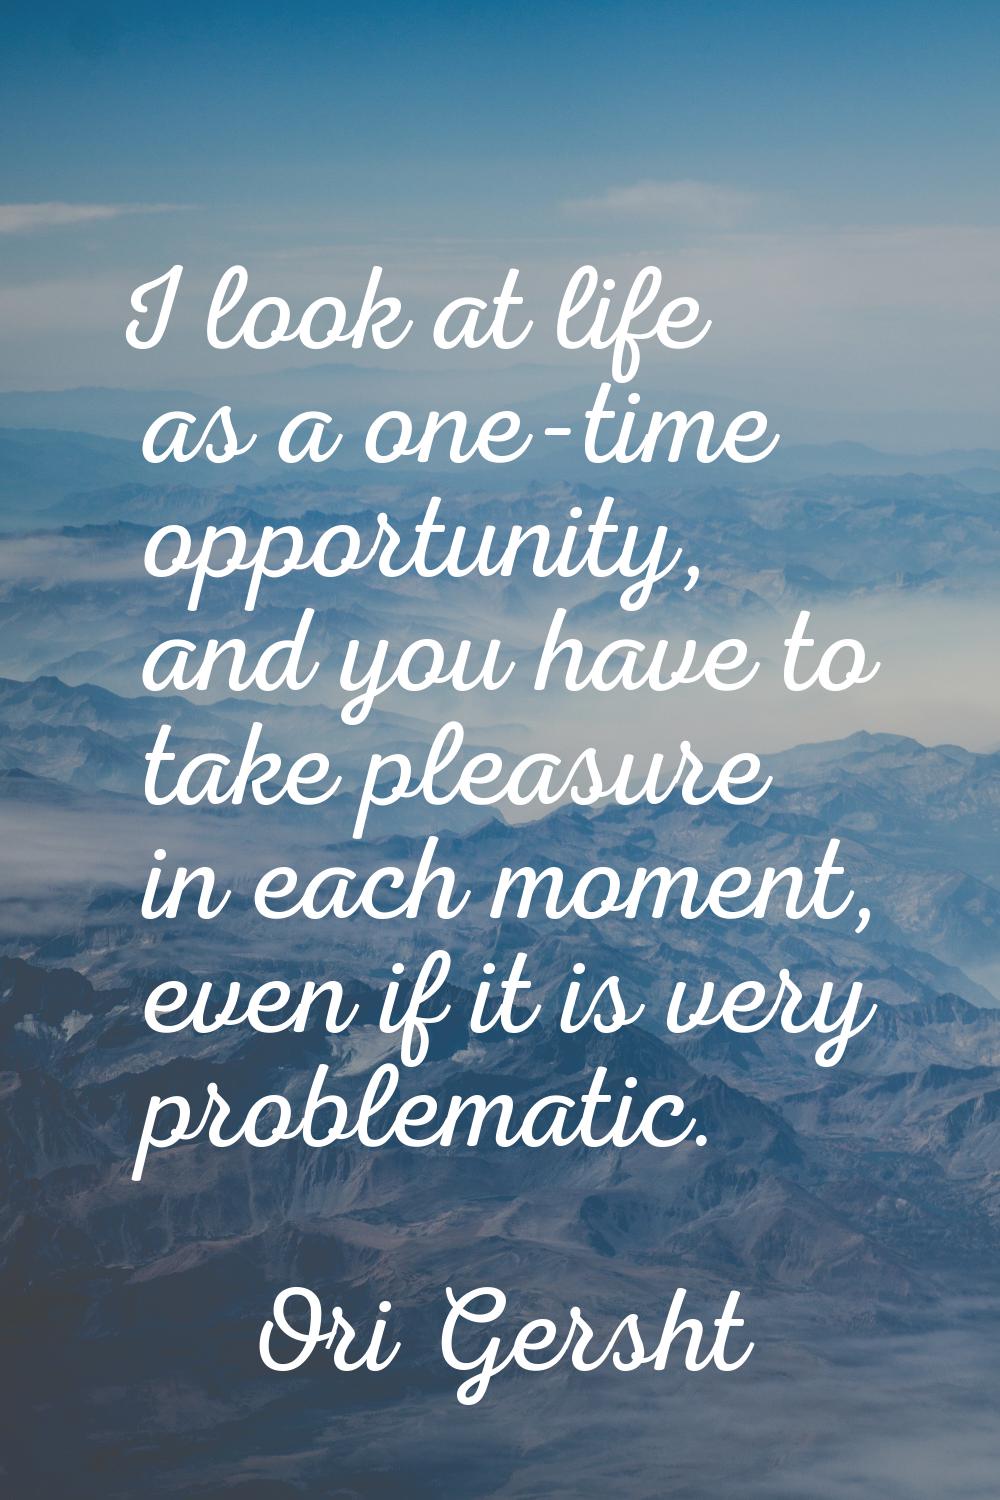 I look at life as a one-time opportunity, and you have to take pleasure in each moment, even if it 